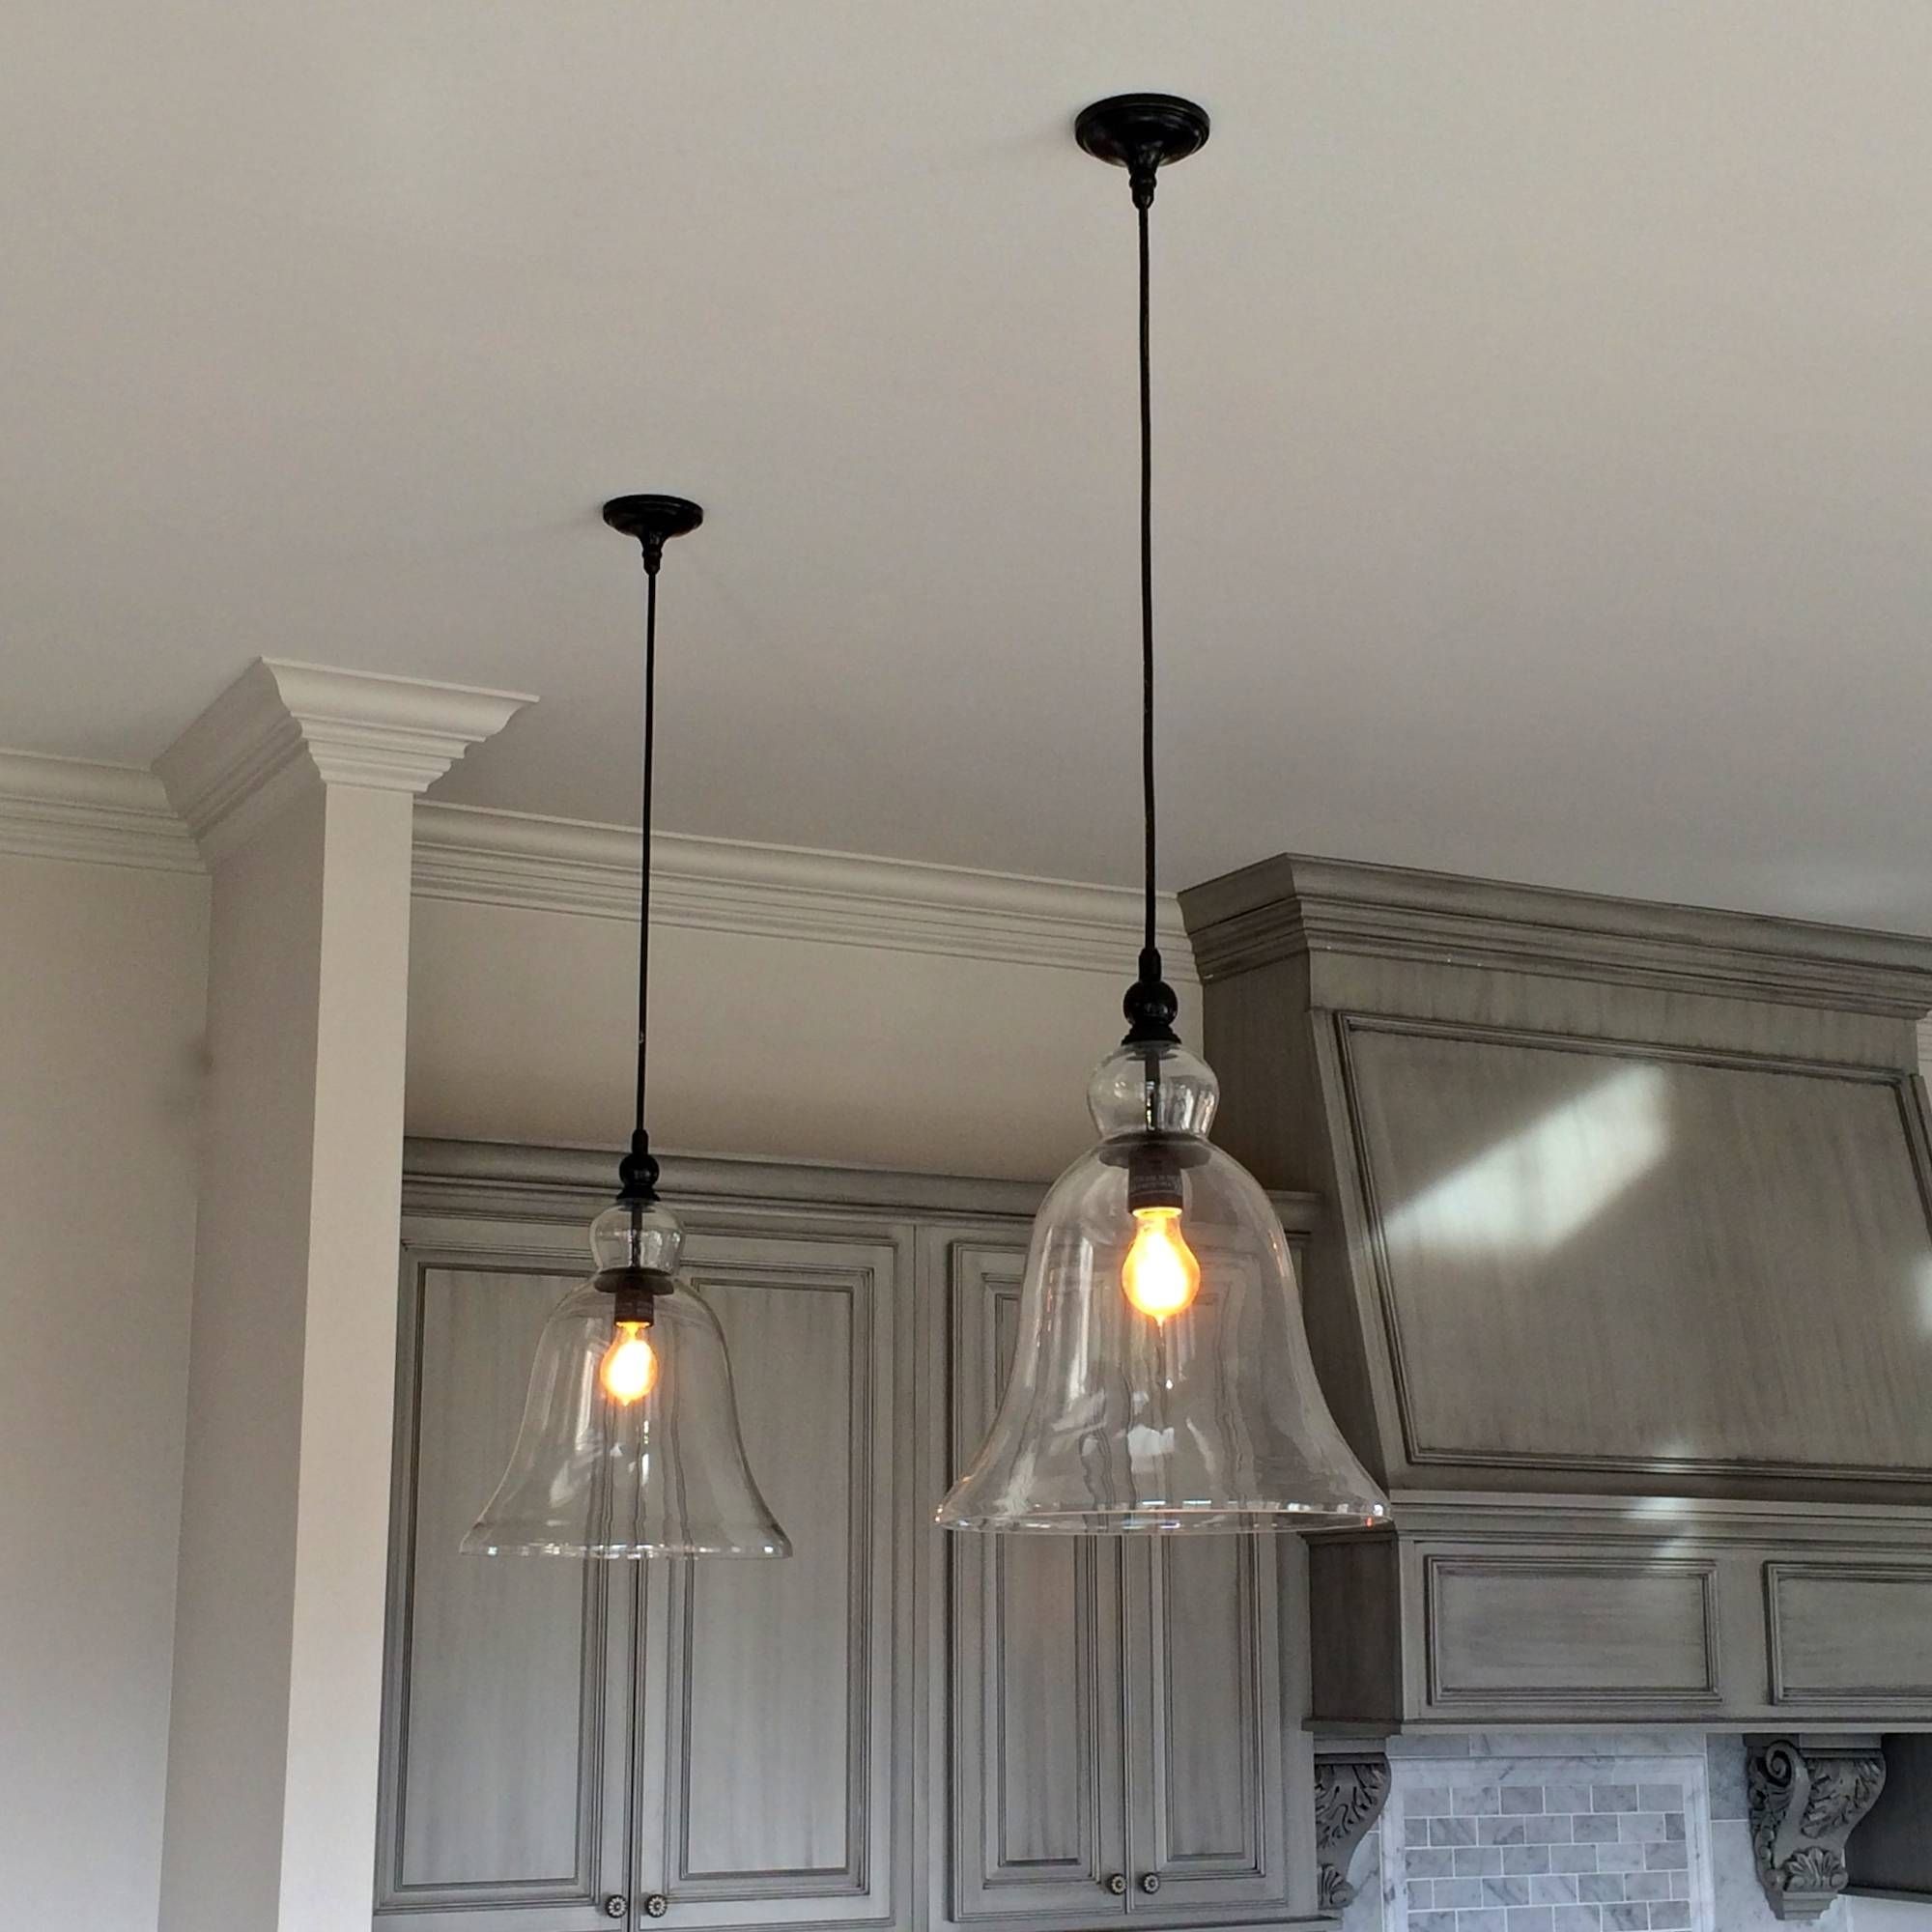 Glass Pendant Lights For Kitchen – Baby Exit With Regard To Unique Glass Pendant Lights (View 10 of 15)